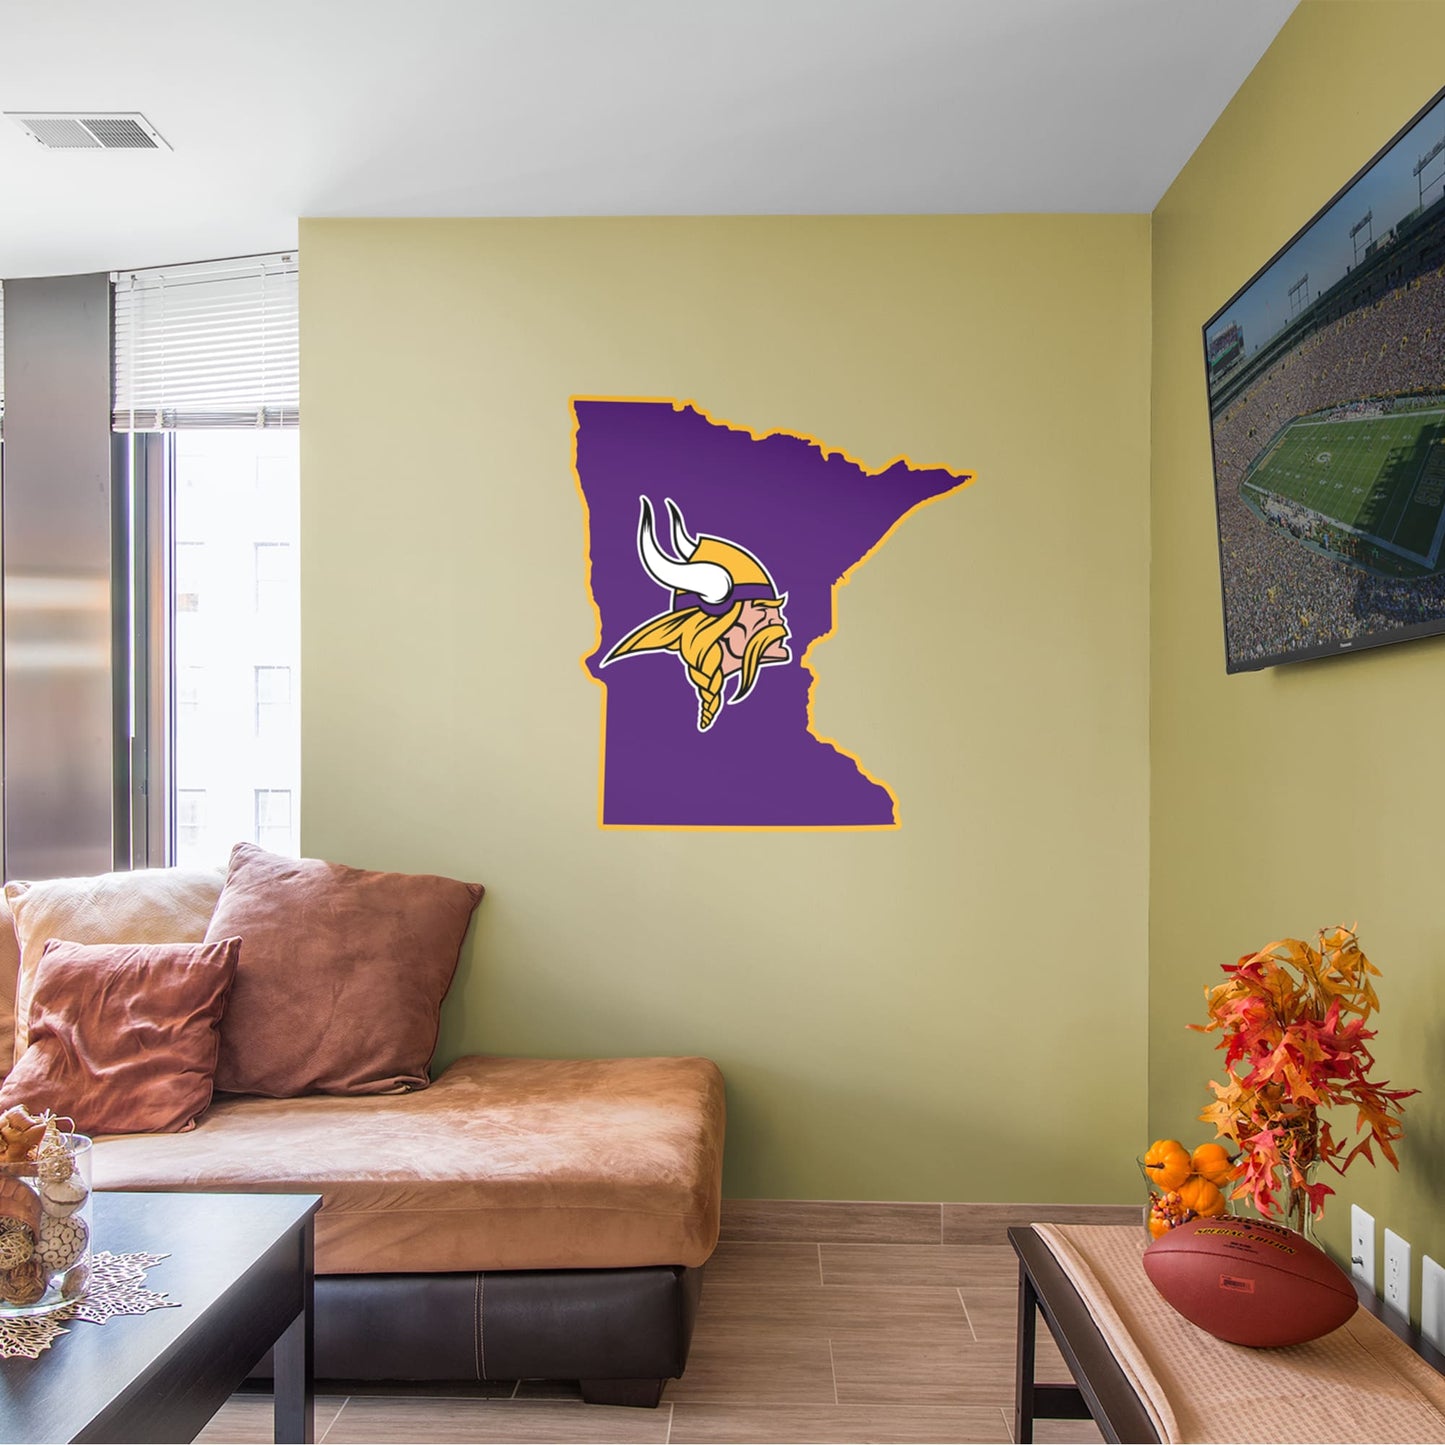 Minnesota Vikings: State of Minnesota - Officially Licensed NFL Removable Wall Decal